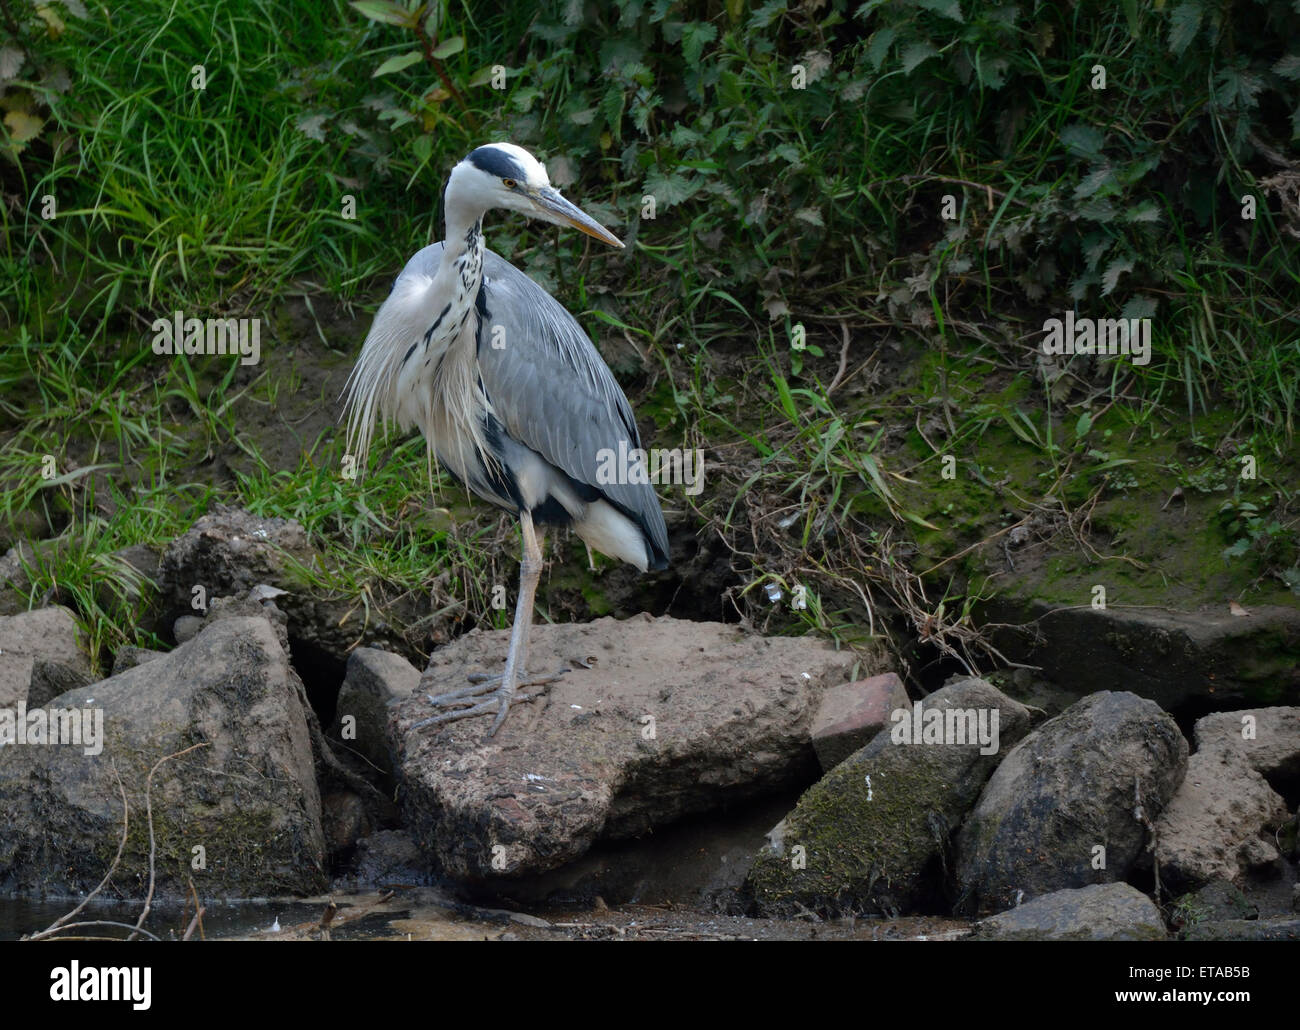 Manchester, UK  12th June 2015 A grey heron searches for fish along the River Mersey as it flows  between Northenden and Didsbury in South Manchester. Grey Heron Search for Food  Manchester, UK Credit:  John Fryer/Alamy Live News Stock Photo